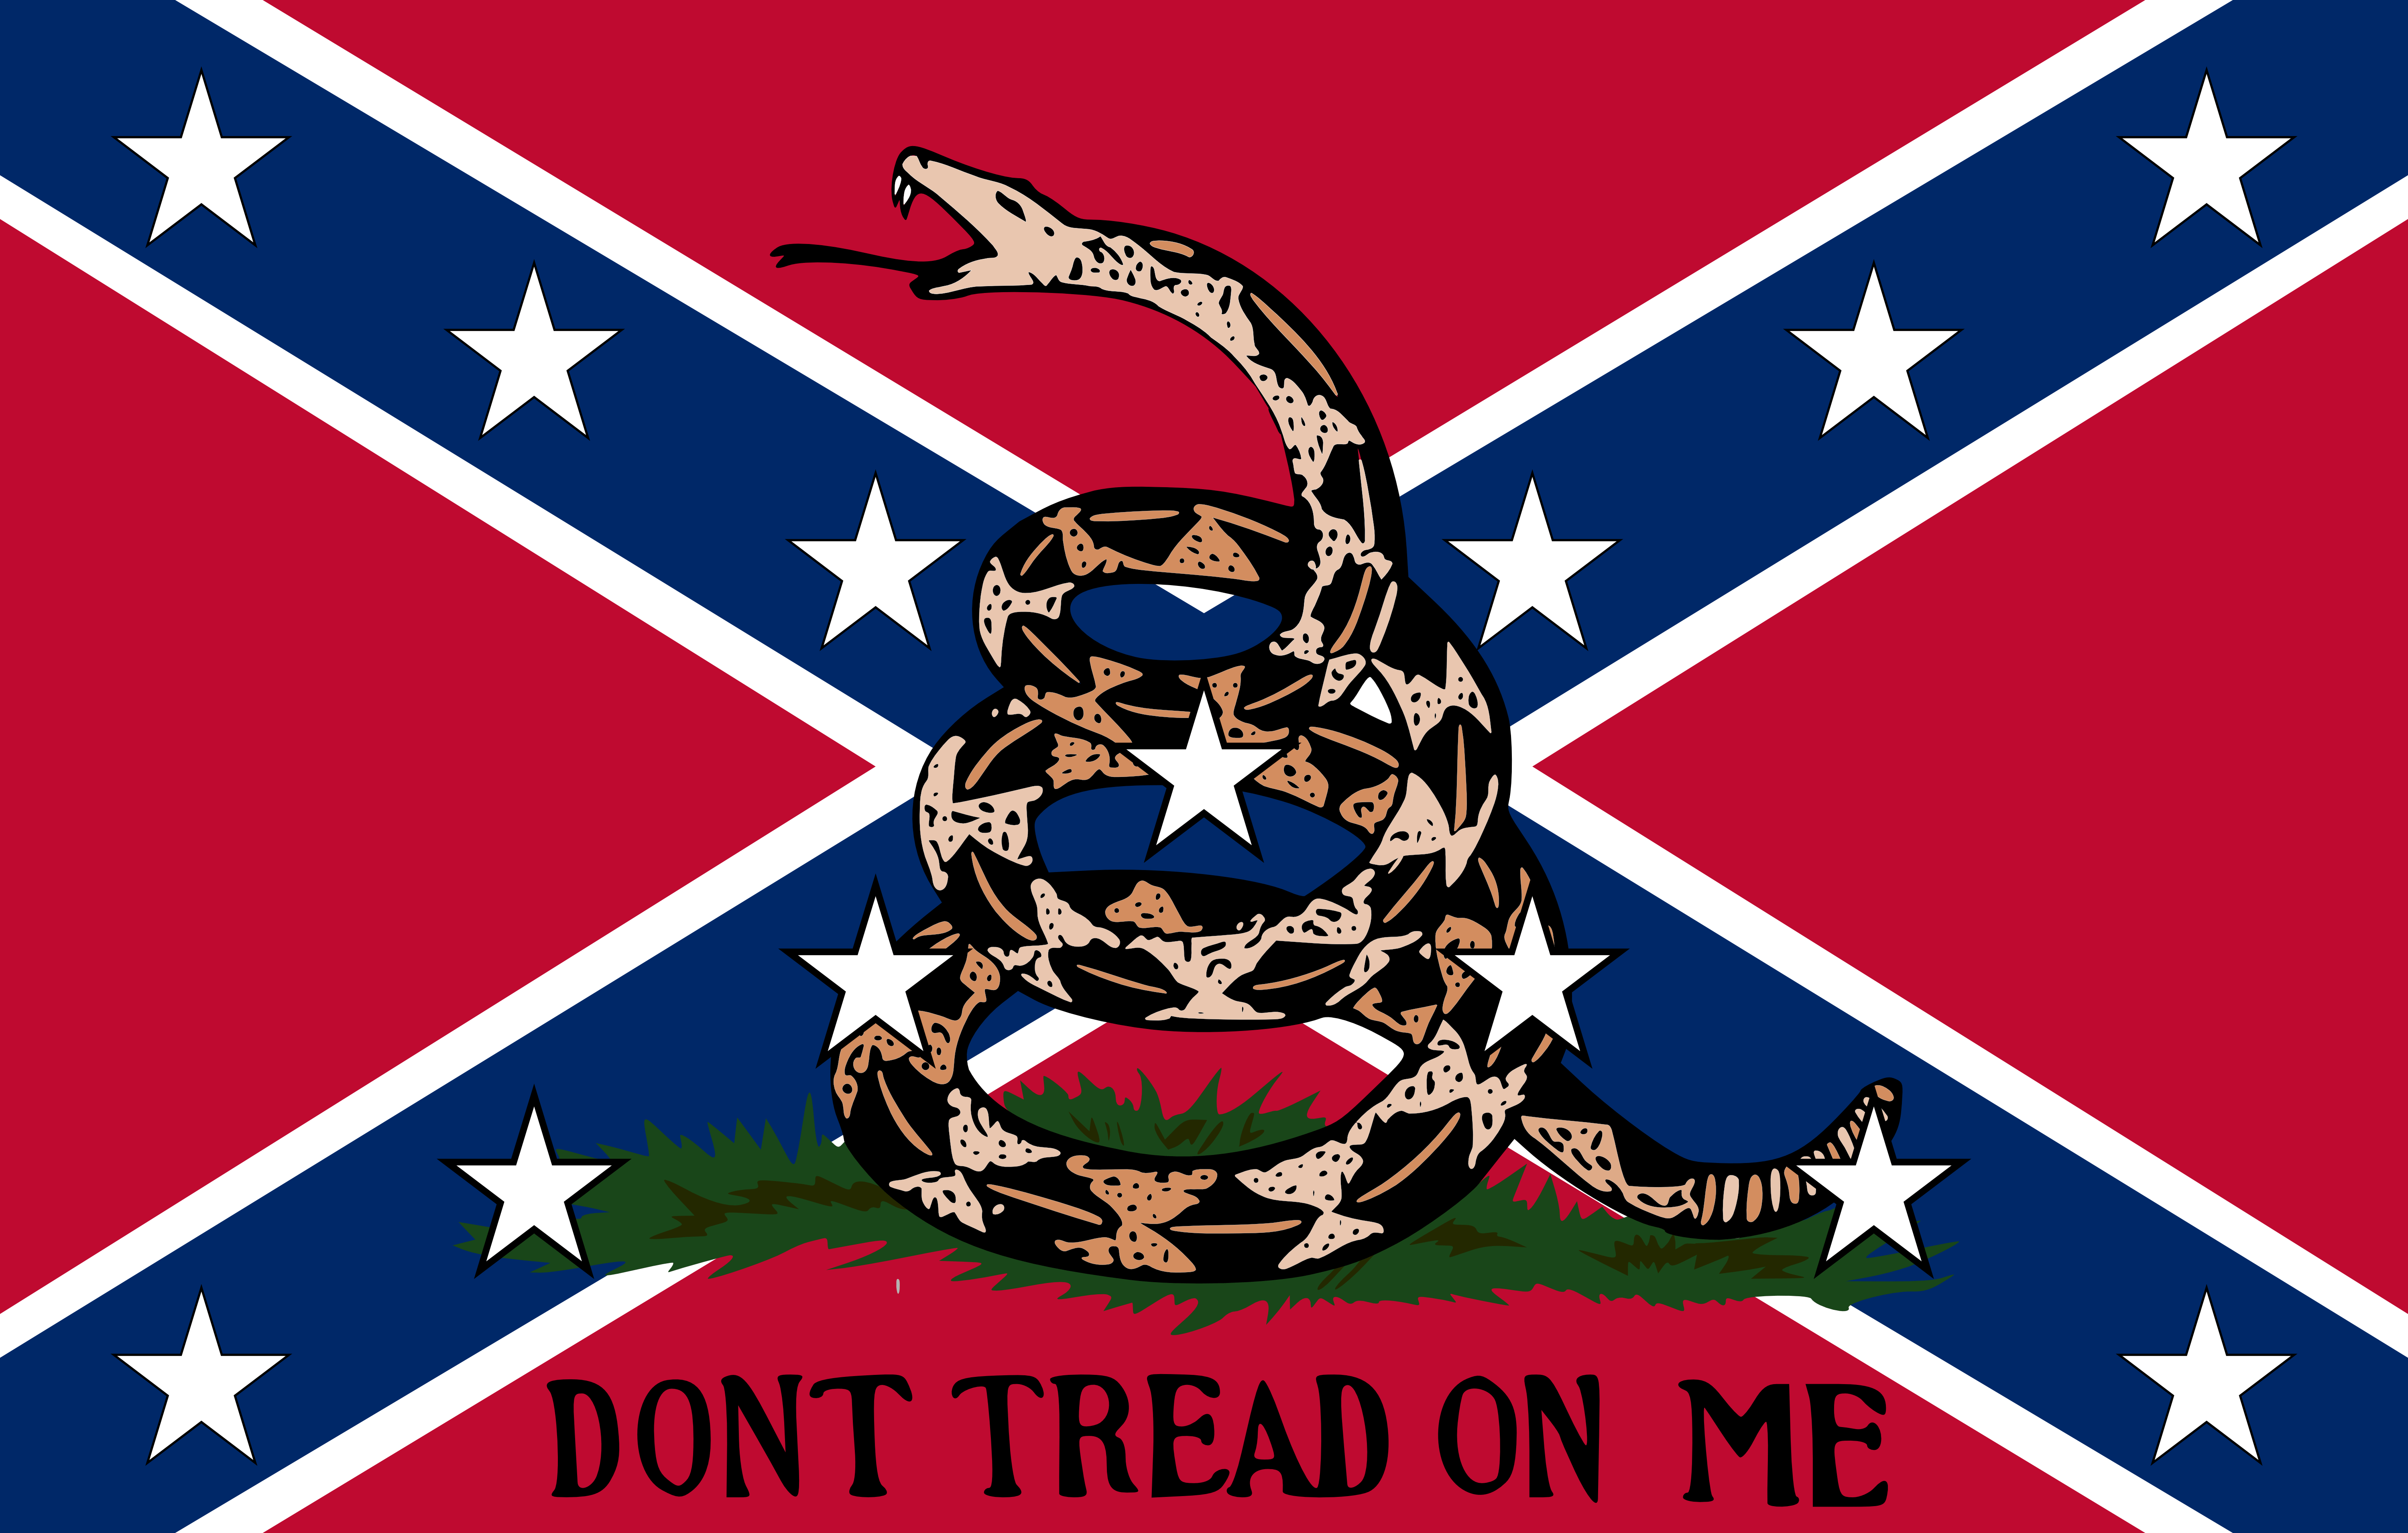 Wallpaper Dont Tread On Me Wallpapers